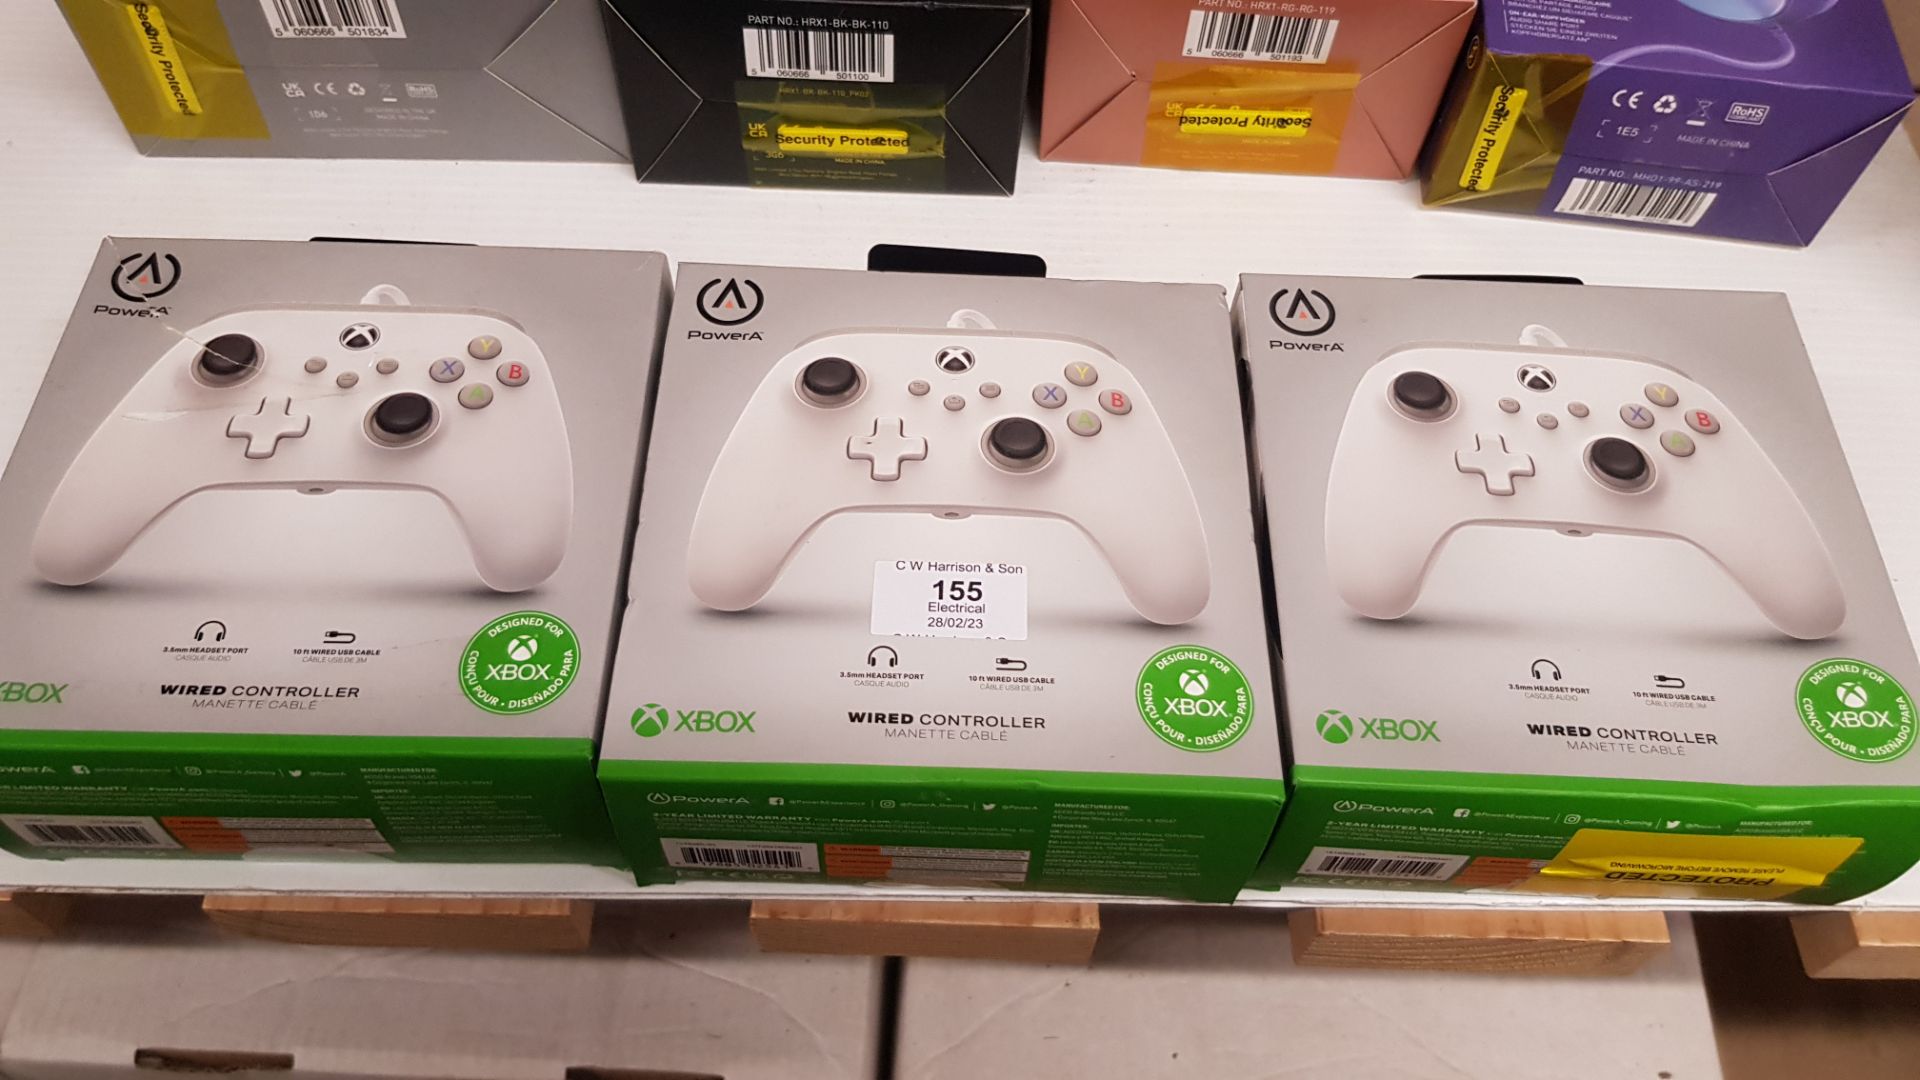 3x Power A Xbox Wired Controller White RRP £25 Each. (Saleroom Location: Upstairs X07). - Image 3 of 3